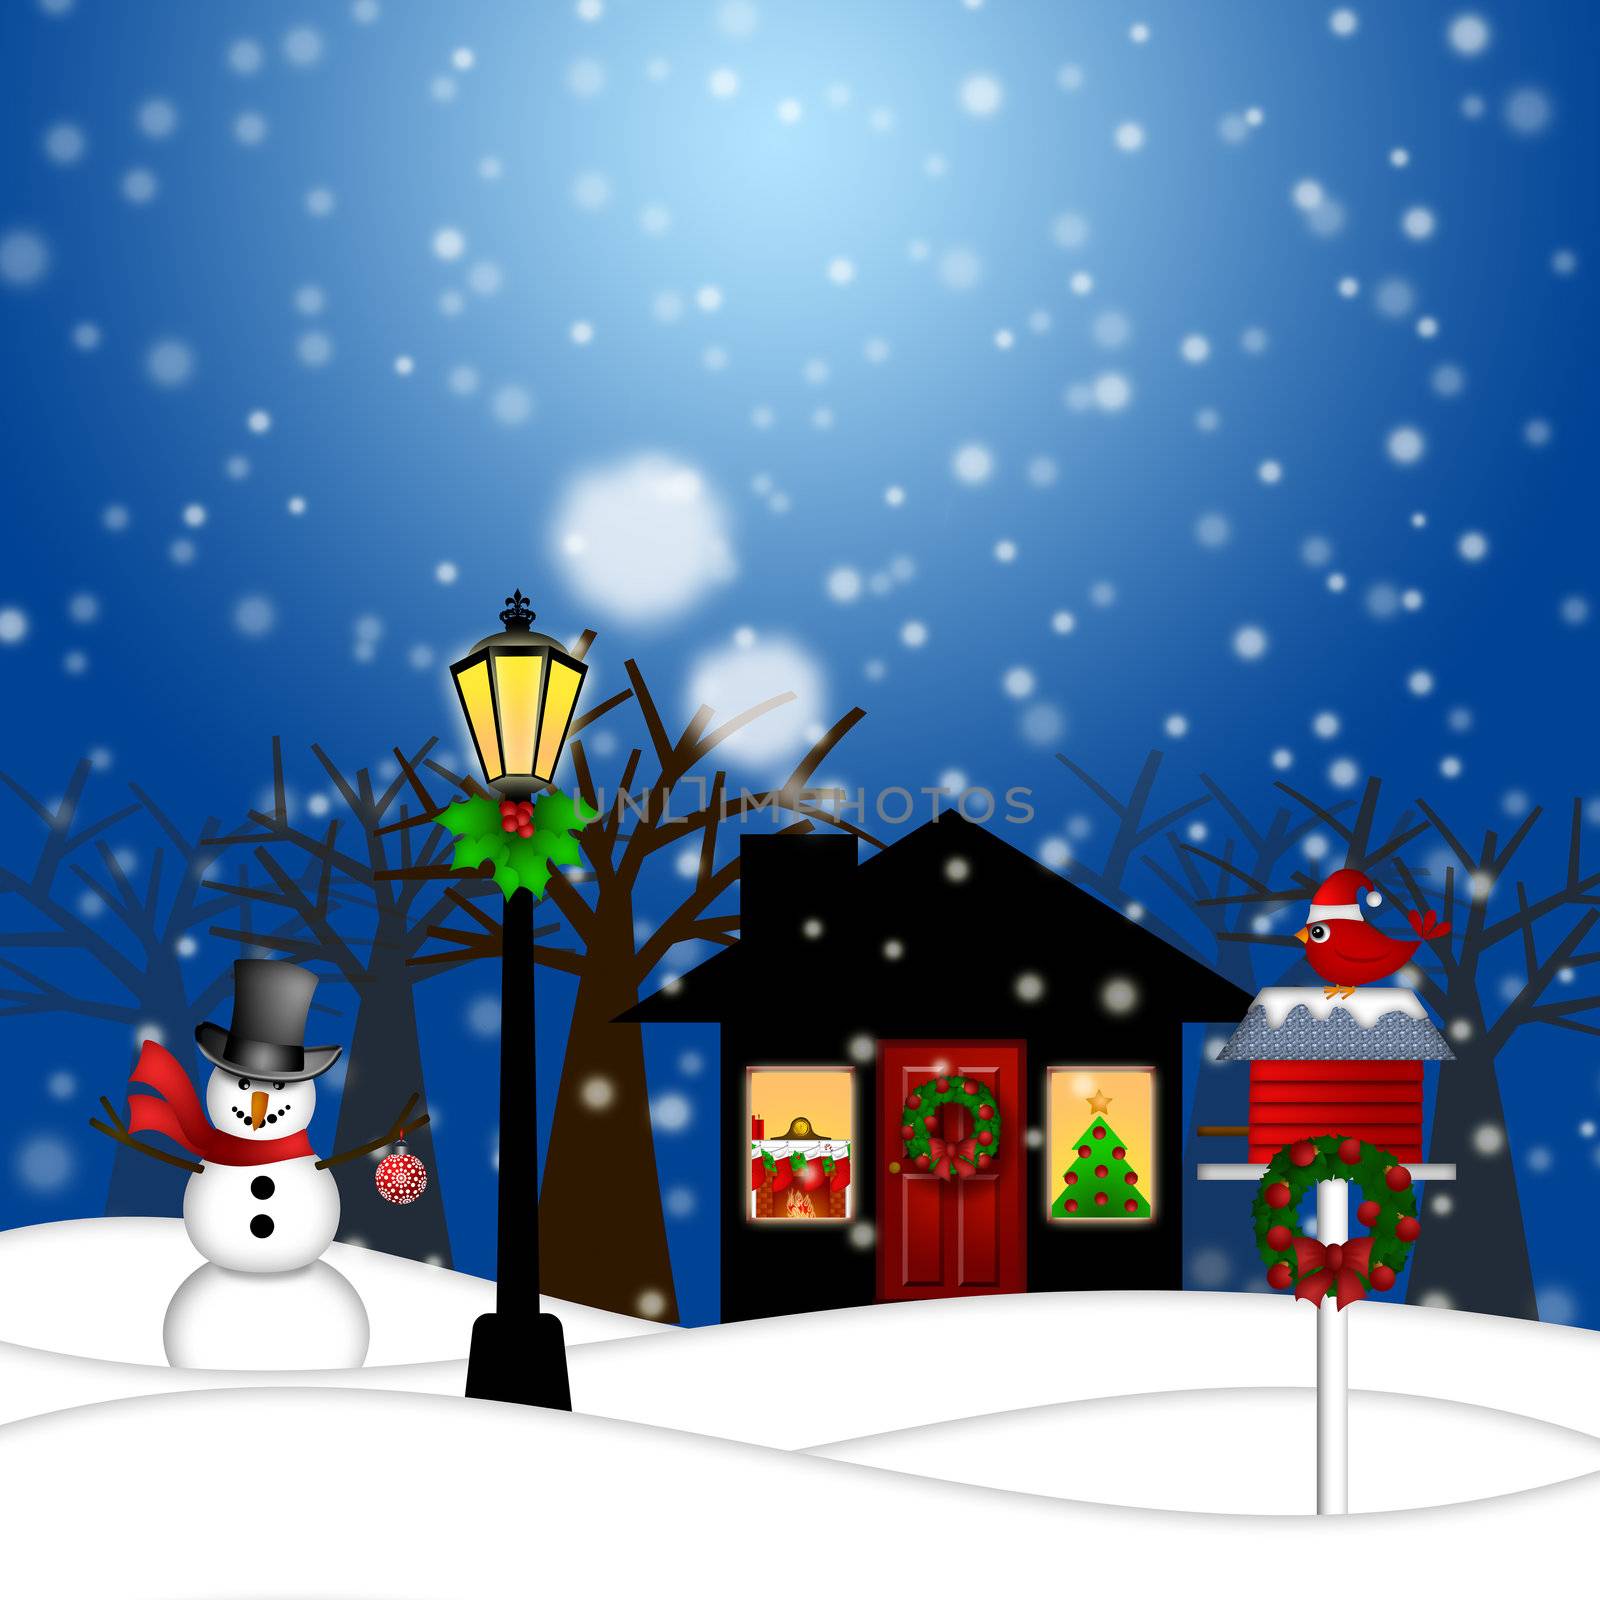 House with Lamp Post Snowman and Birdhouse Christmas Decoration in Snowing Winter Scene Landscape Illustration